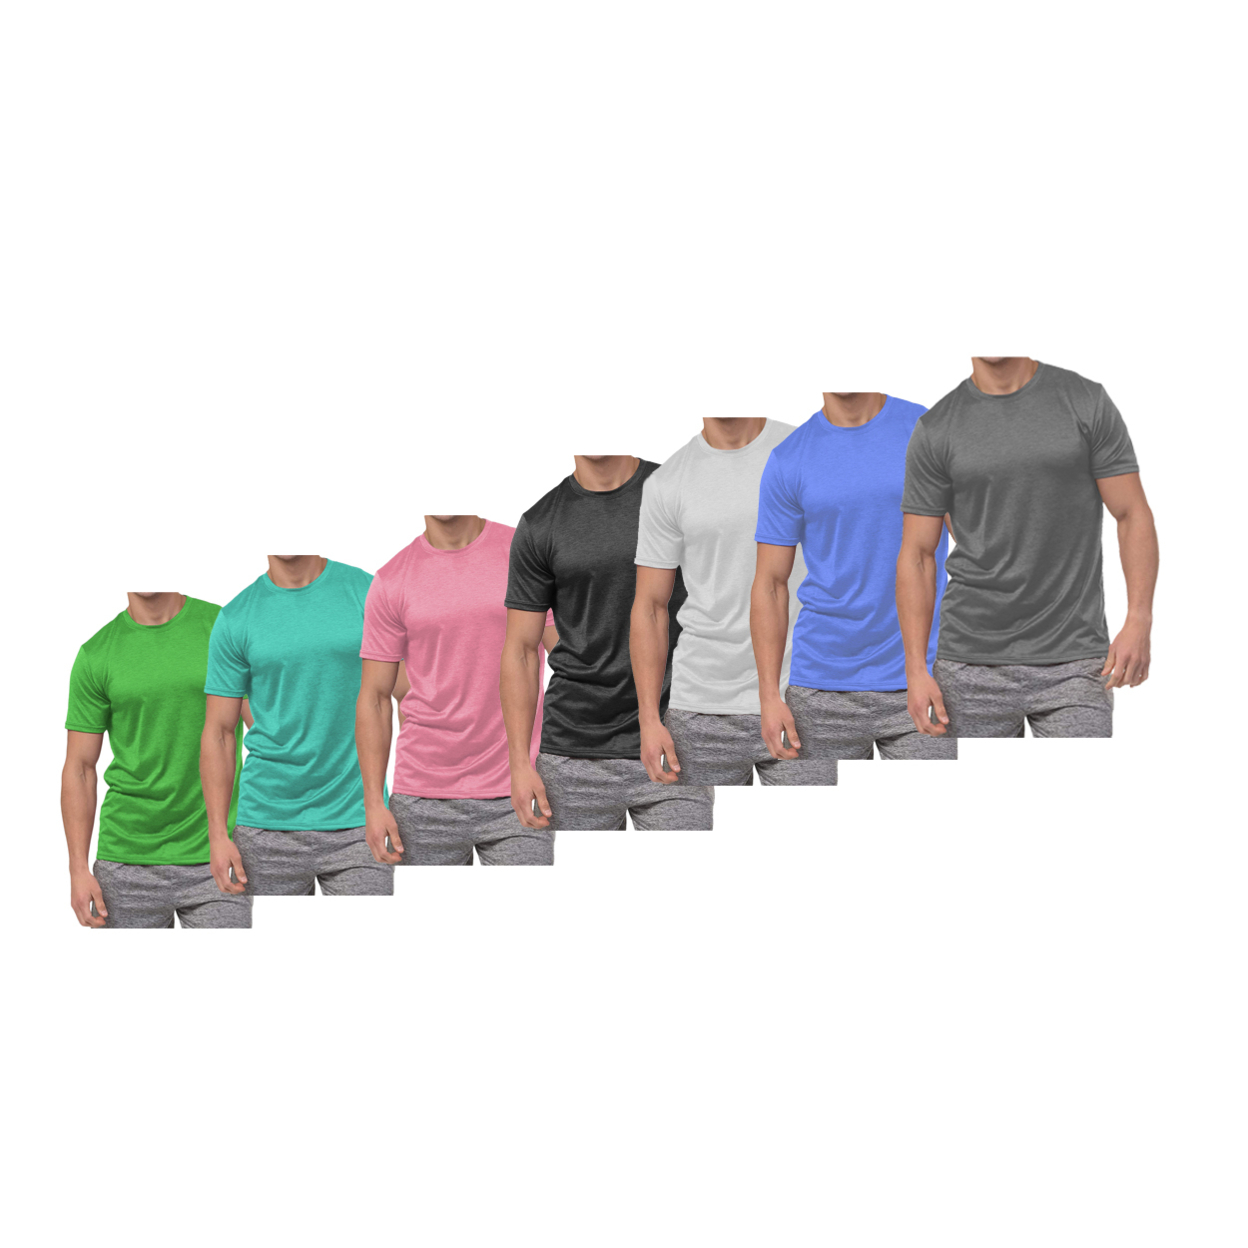 5-Pack: Men's Active Moisture Wicking Dry Fit Crew Neck Shirts - Small